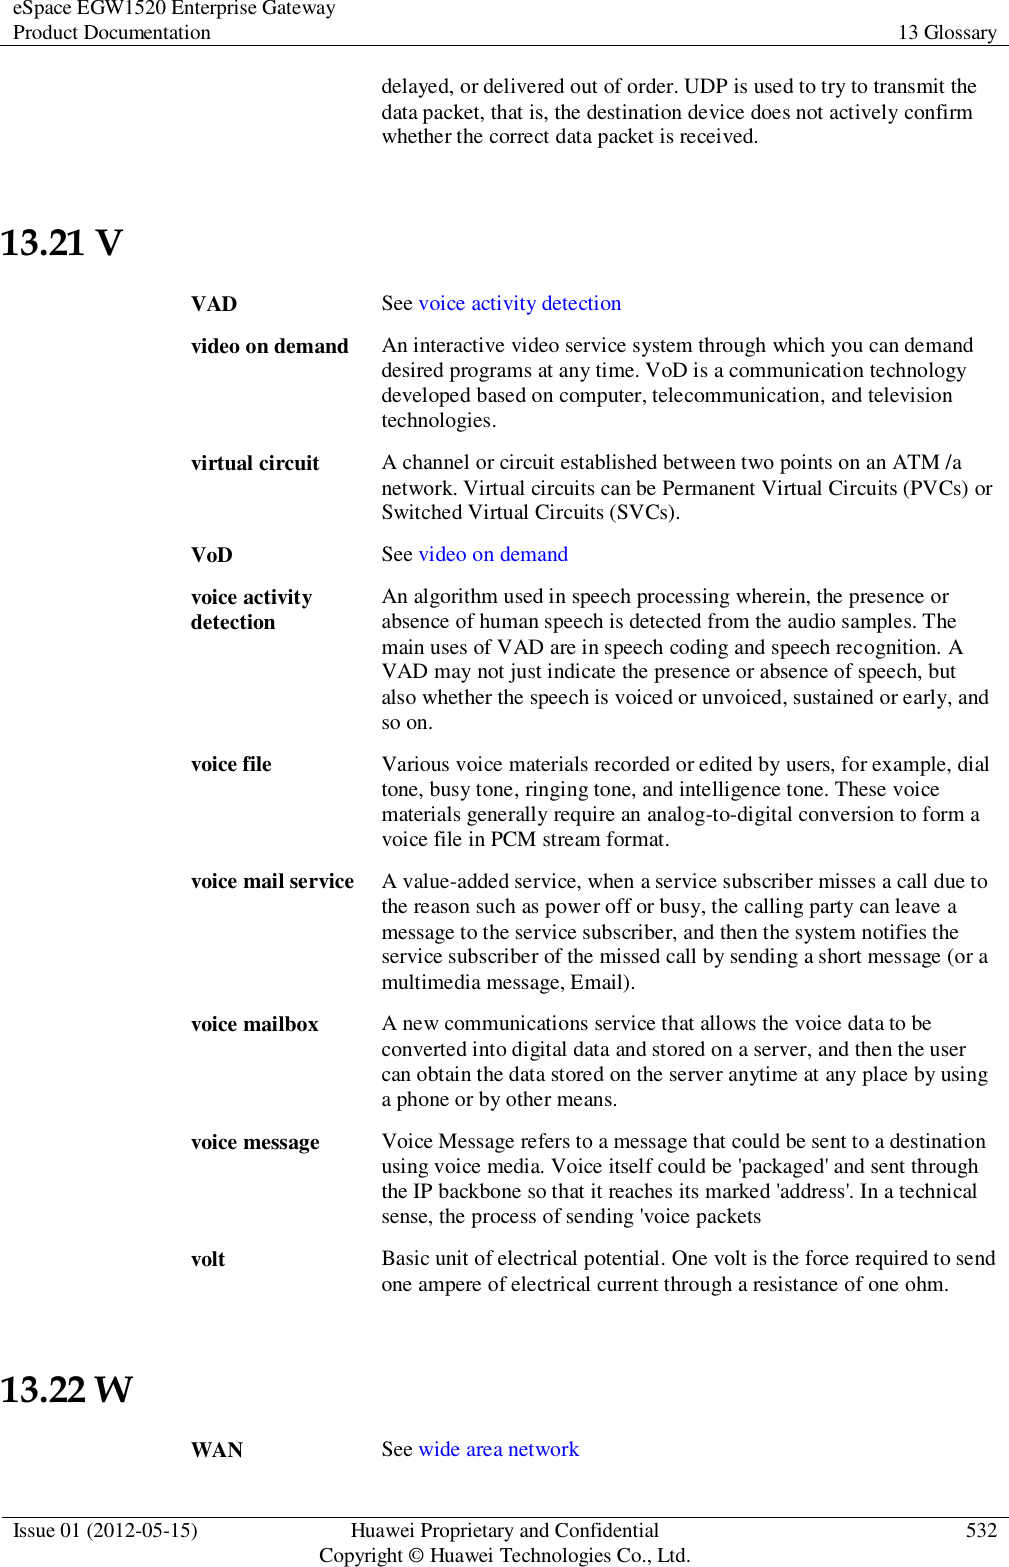 eSpace EGW1520 Enterprise Gateway Product Documentation 13 Glossary  Issue 01 (2012-05-15) Huawei Proprietary and Confidential                                     Copyright © Huawei Technologies Co., Ltd. 532  delayed, or delivered out of order. UDP is used to try to transmit the data packet, that is, the destination device does not actively confirm whether the correct data packet is received. 13.21 V VAD See voice activity detection video on demand An interactive video service system through which you can demand desired programs at any time. VoD is a communication technology developed based on computer, telecommunication, and television technologies. virtual circuit A channel or circuit established between two points on an ATM /a network. Virtual circuits can be Permanent Virtual Circuits (PVCs) or Switched Virtual Circuits (SVCs). VoD See video on demand voice activity detection An algorithm used in speech processing wherein, the presence or absence of human speech is detected from the audio samples. The main uses of VAD are in speech coding and speech recognition. A VAD may not just indicate the presence or absence of speech, but also whether the speech is voiced or unvoiced, sustained or early, and so on. voice file Various voice materials recorded or edited by users, for example, dial tone, busy tone, ringing tone, and intelligence tone. These voice materials generally require an analog-to-digital conversion to form a voice file in PCM stream format. voice mail service A value-added service, when a service subscriber misses a call due to the reason such as power off or busy, the calling party can leave a message to the service subscriber, and then the system notifies the service subscriber of the missed call by sending a short message (or a multimedia message, Email). voice mailbox A new communications service that allows the voice data to be converted into digital data and stored on a server, and then the user can obtain the data stored on the server anytime at any place by using a phone or by other means. voice message Voice Message refers to a message that could be sent to a destination using voice media. Voice itself could be &apos;packaged&apos; and sent through the IP backbone so that it reaches its marked &apos;address&apos;. In a technical sense, the process of sending &apos;voice packets volt Basic unit of electrical potential. One volt is the force required to send one ampere of electrical current through a resistance of one ohm. 13.22 W WAN See wide area network 